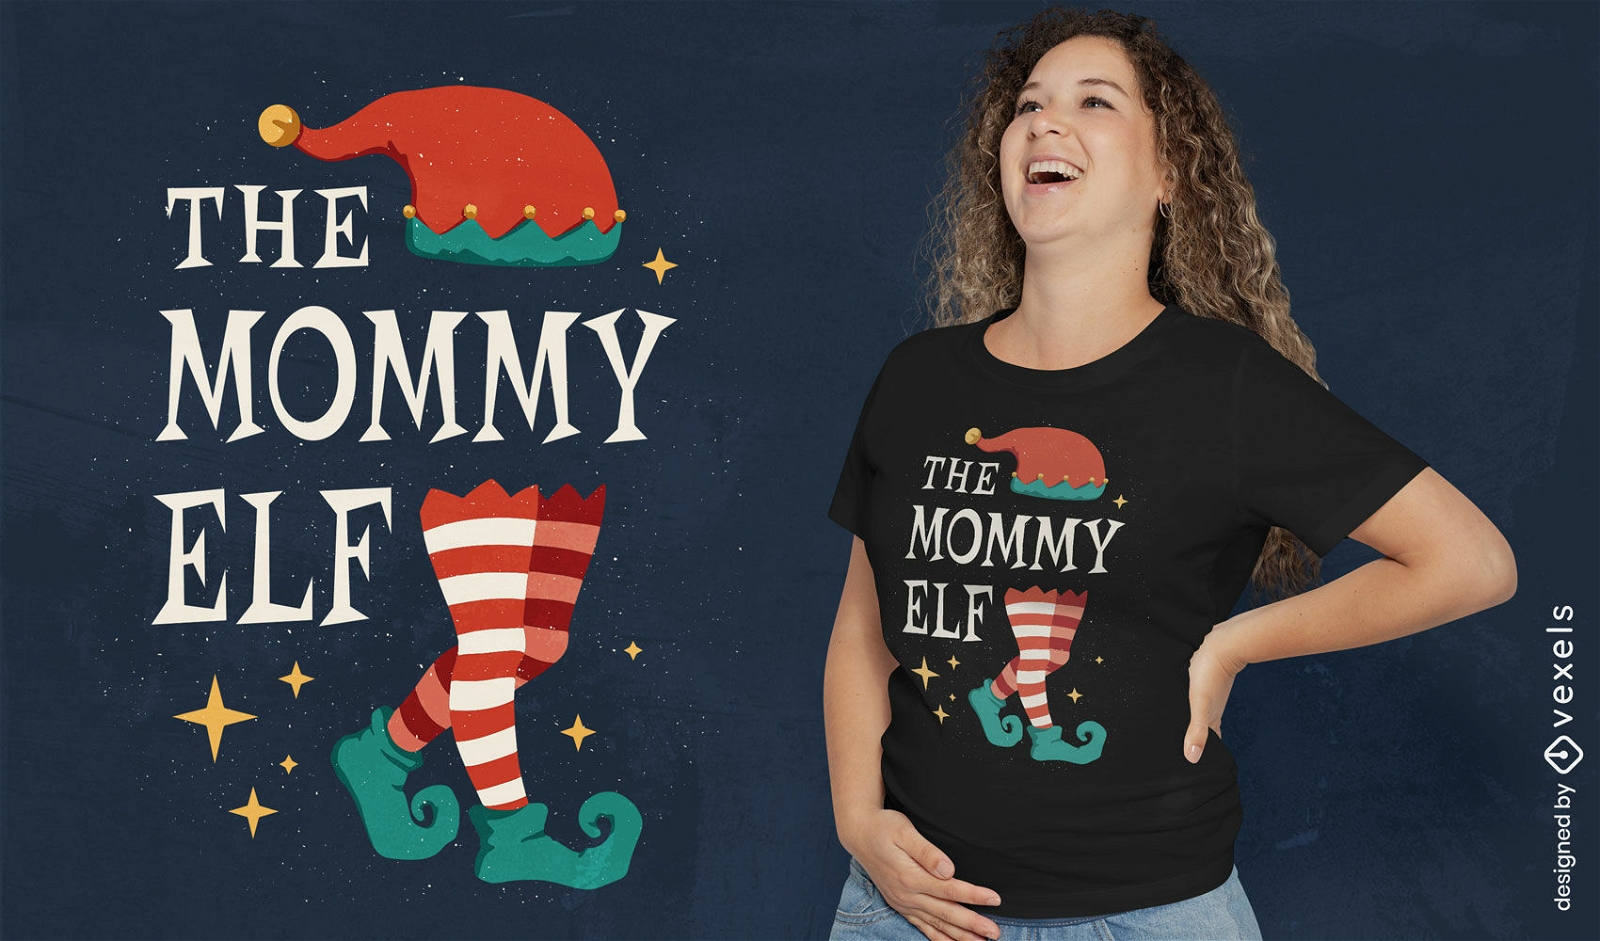 Mommy elf quote t-shirt design